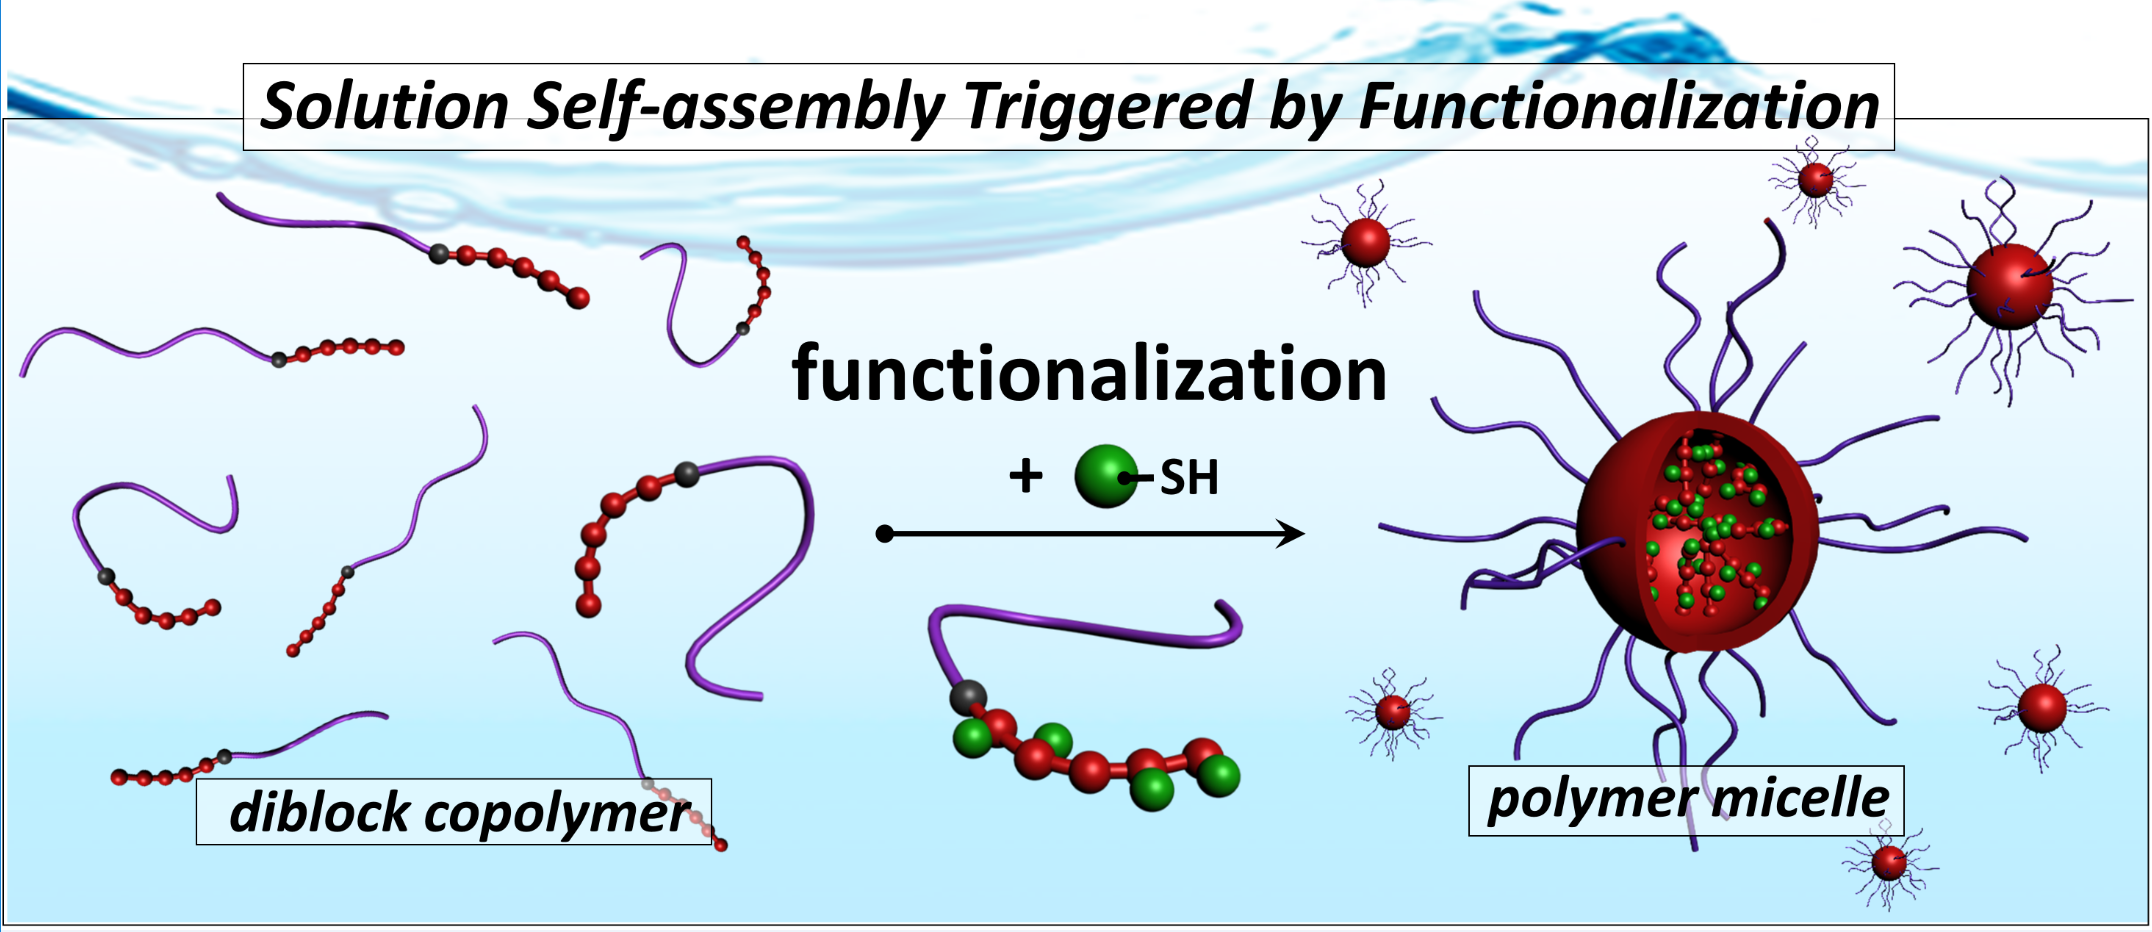 Functionalized Nanomaterial Assembling and Biosynthesis Using the